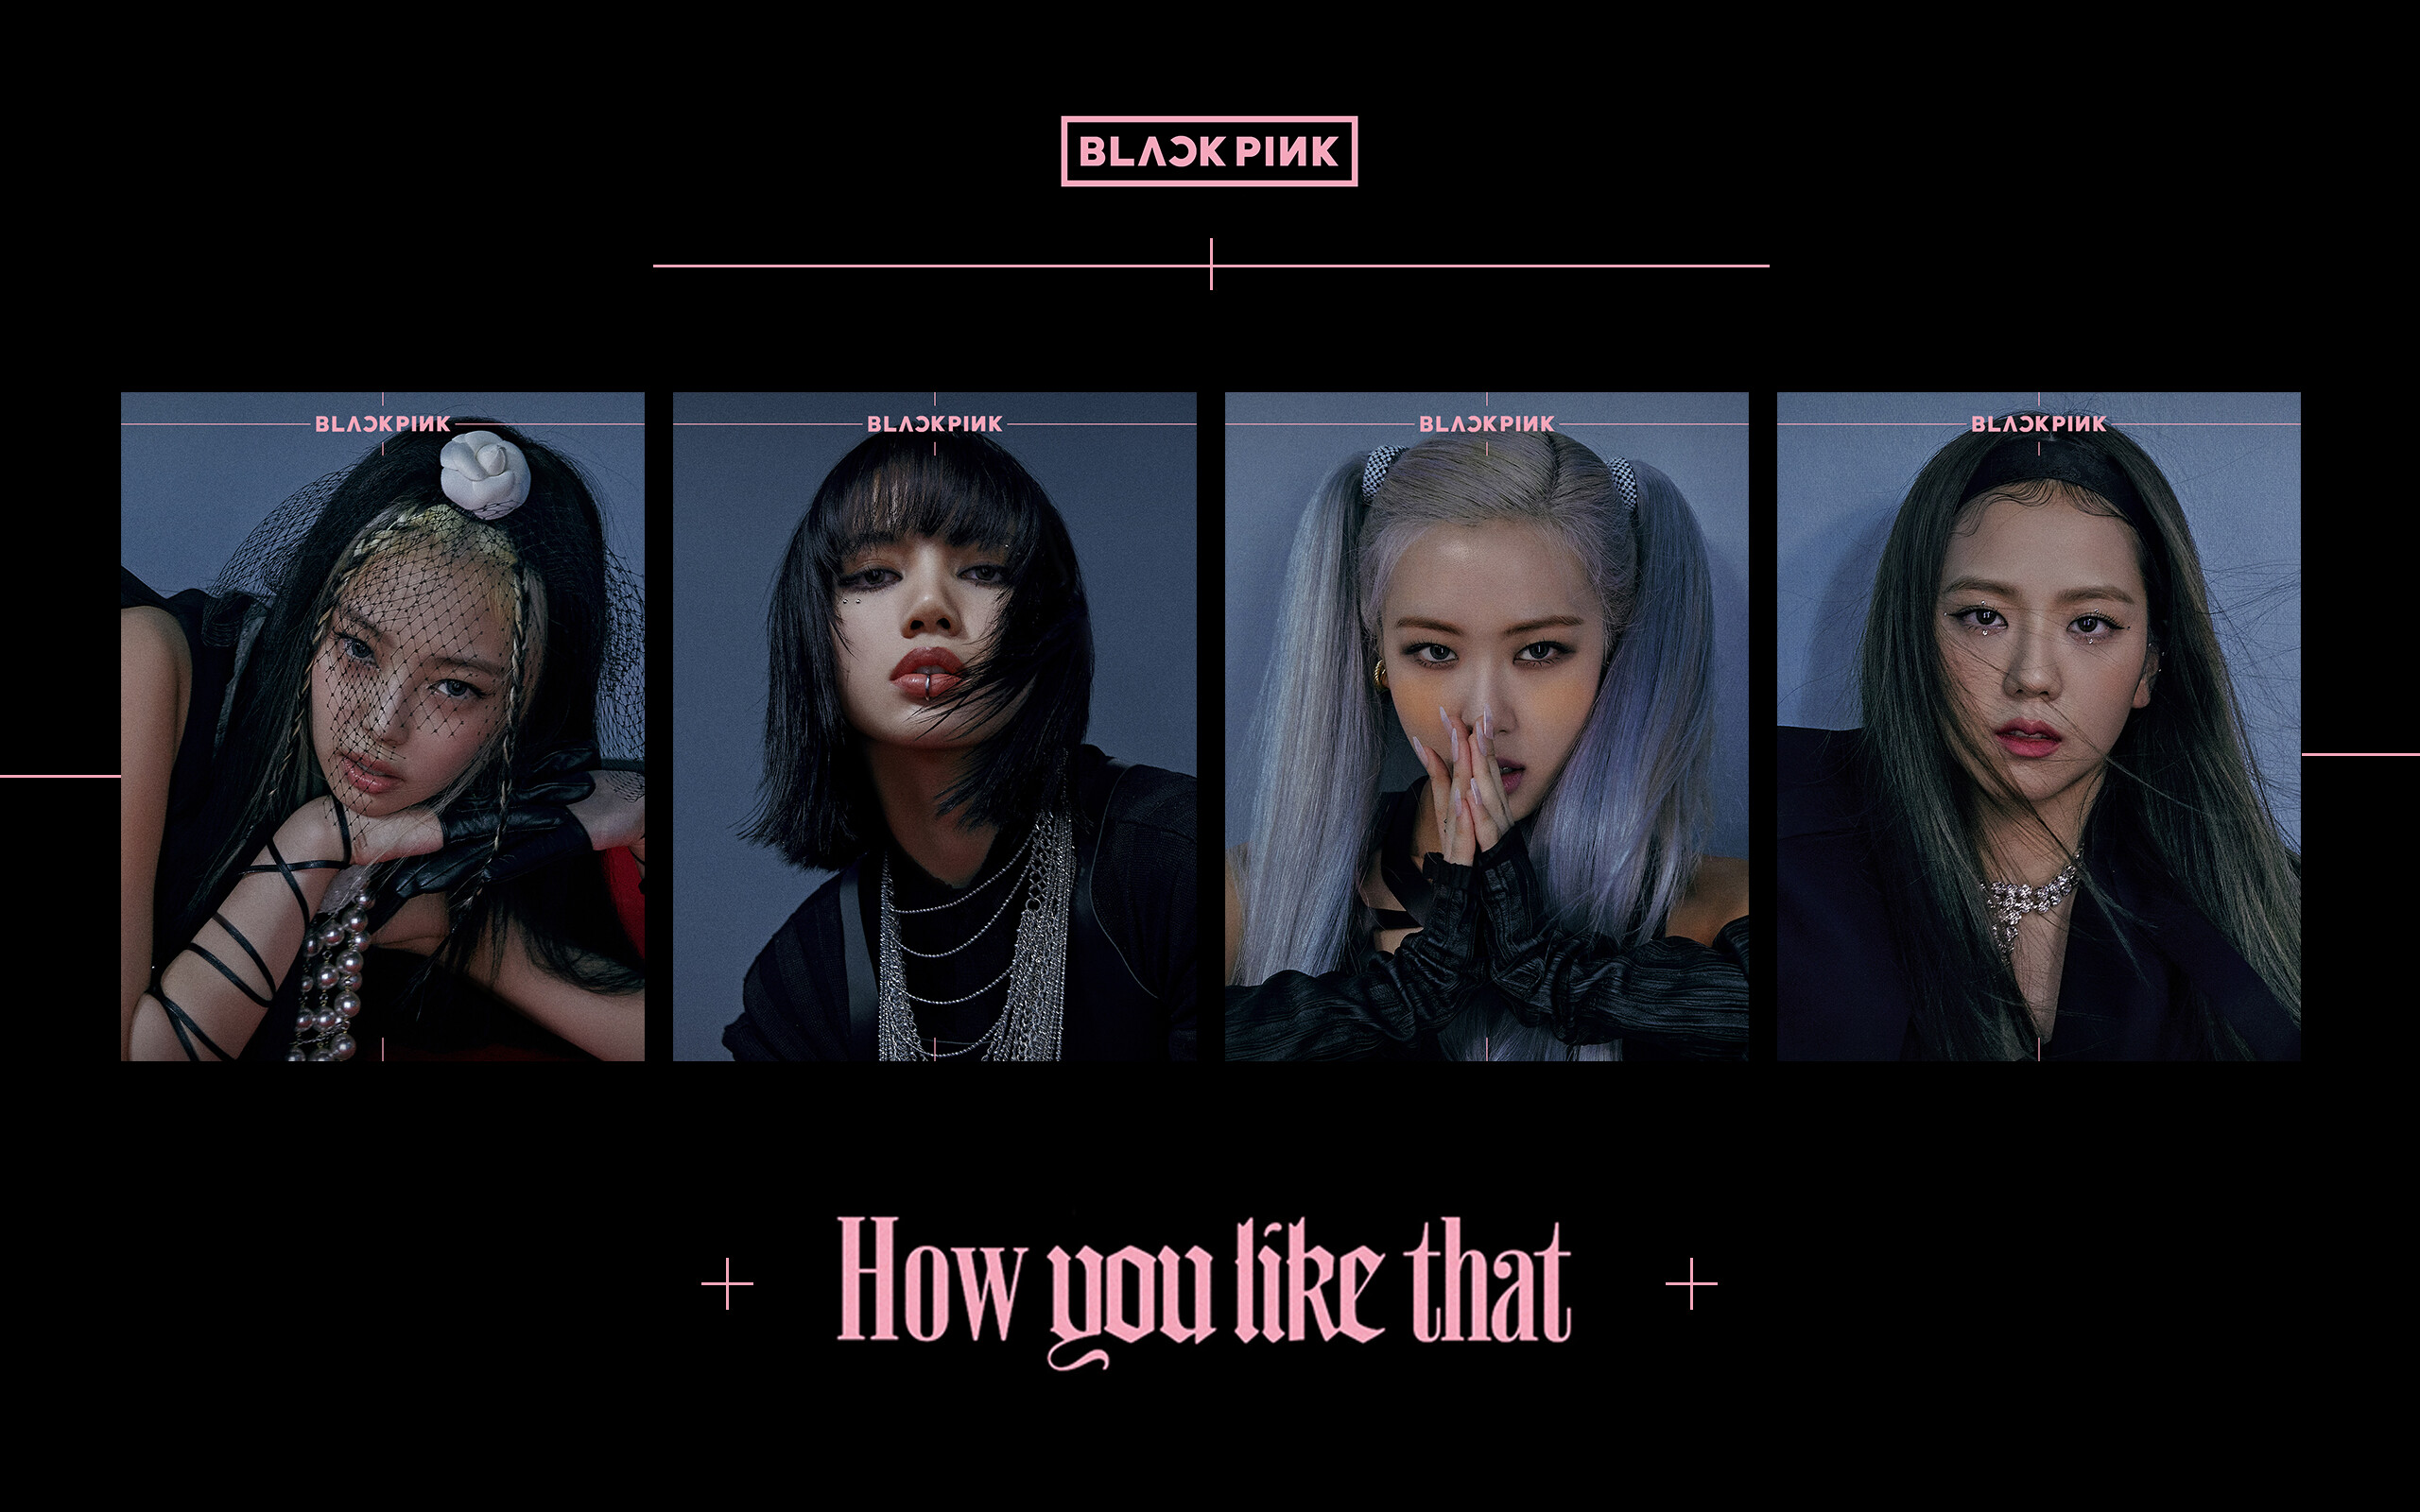 BLACKPINK: A South Korean girl group, How you like that. 2560x1600 HD Wallpaper.